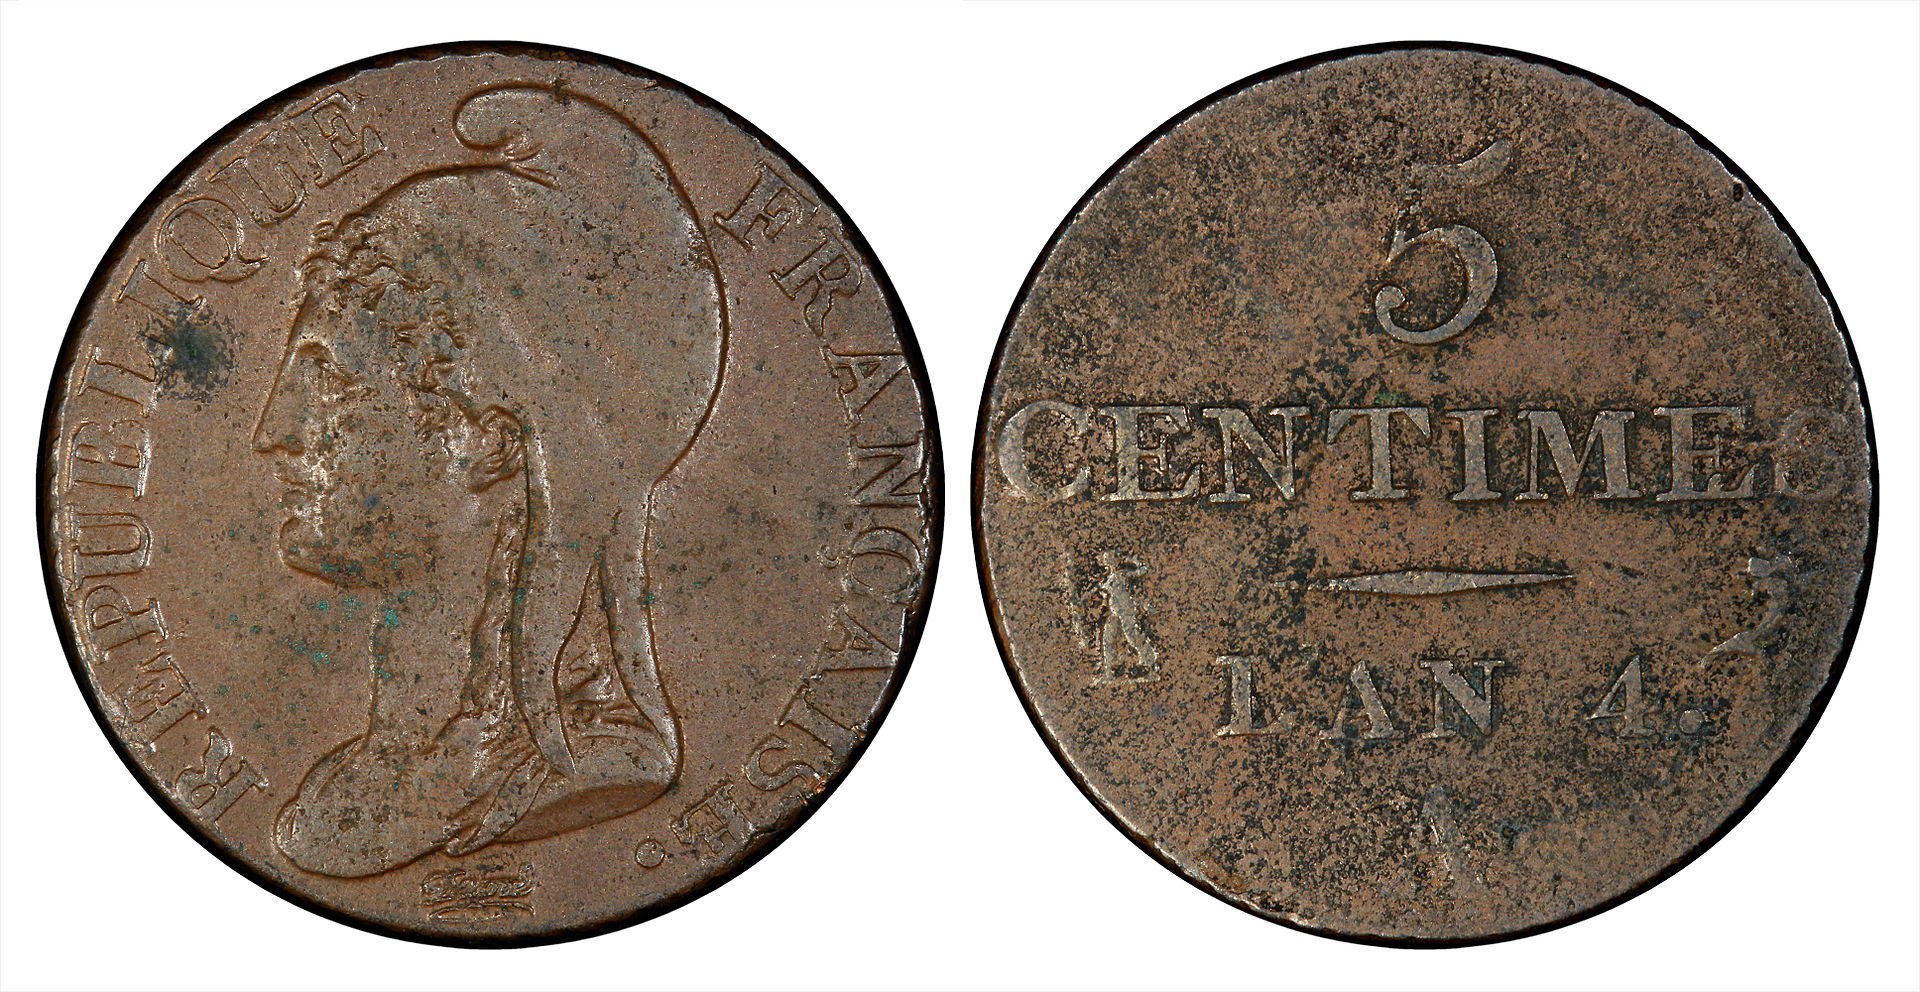 a 1795 French 5 centimes piece